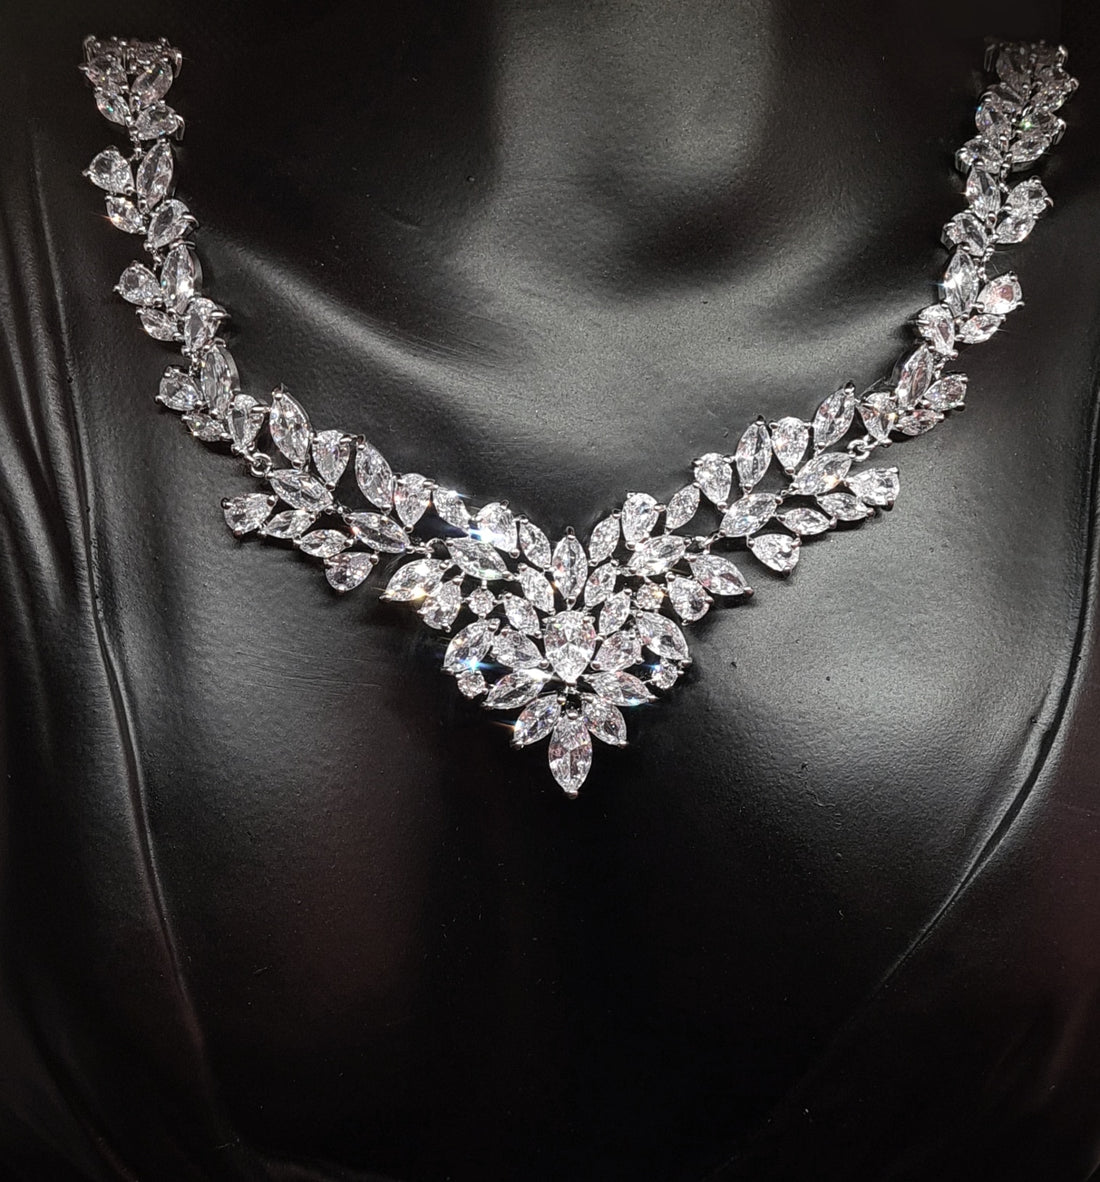 A close-up of a silver necklace with diamonds on it. The necklace is made of silver and has a delicate design. The diamonds are tear drop and sparkling. The necklace is sitting on a mannequin's neck.